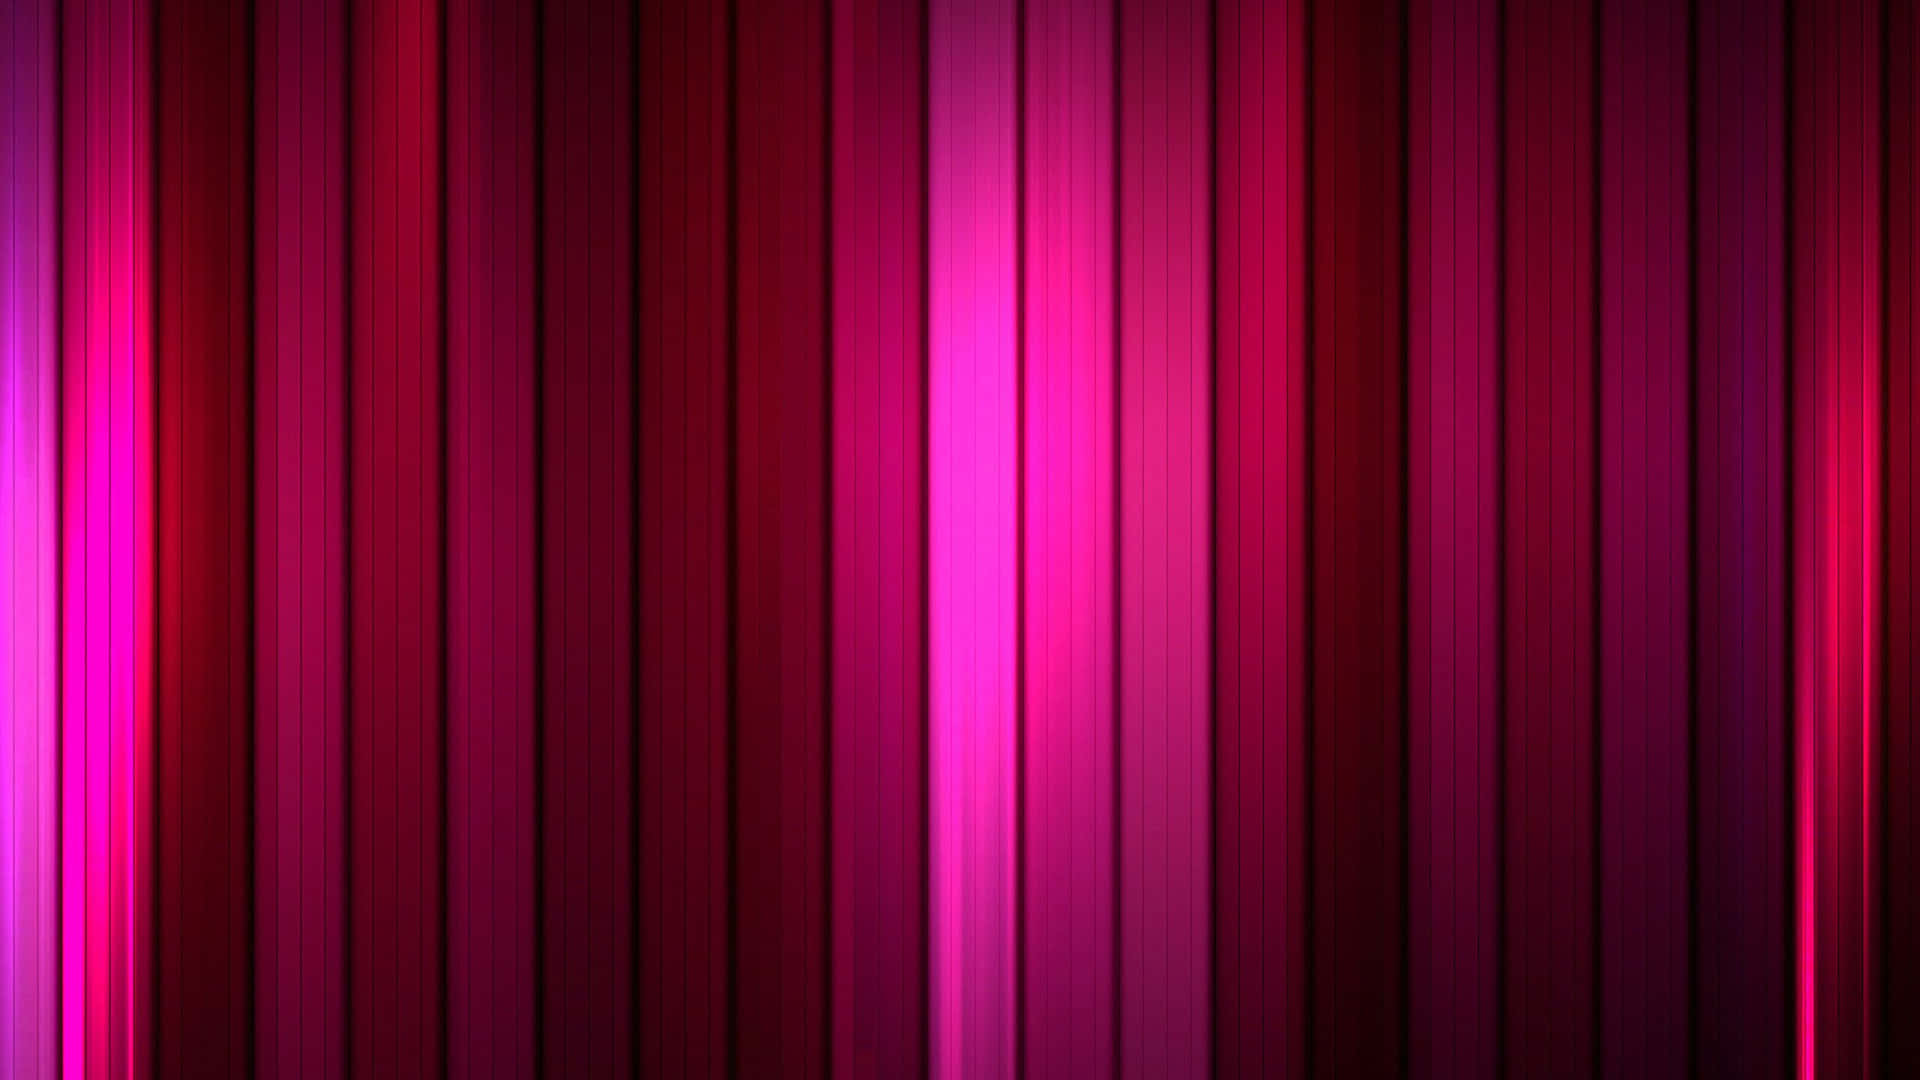 Super vibrant pink and red background